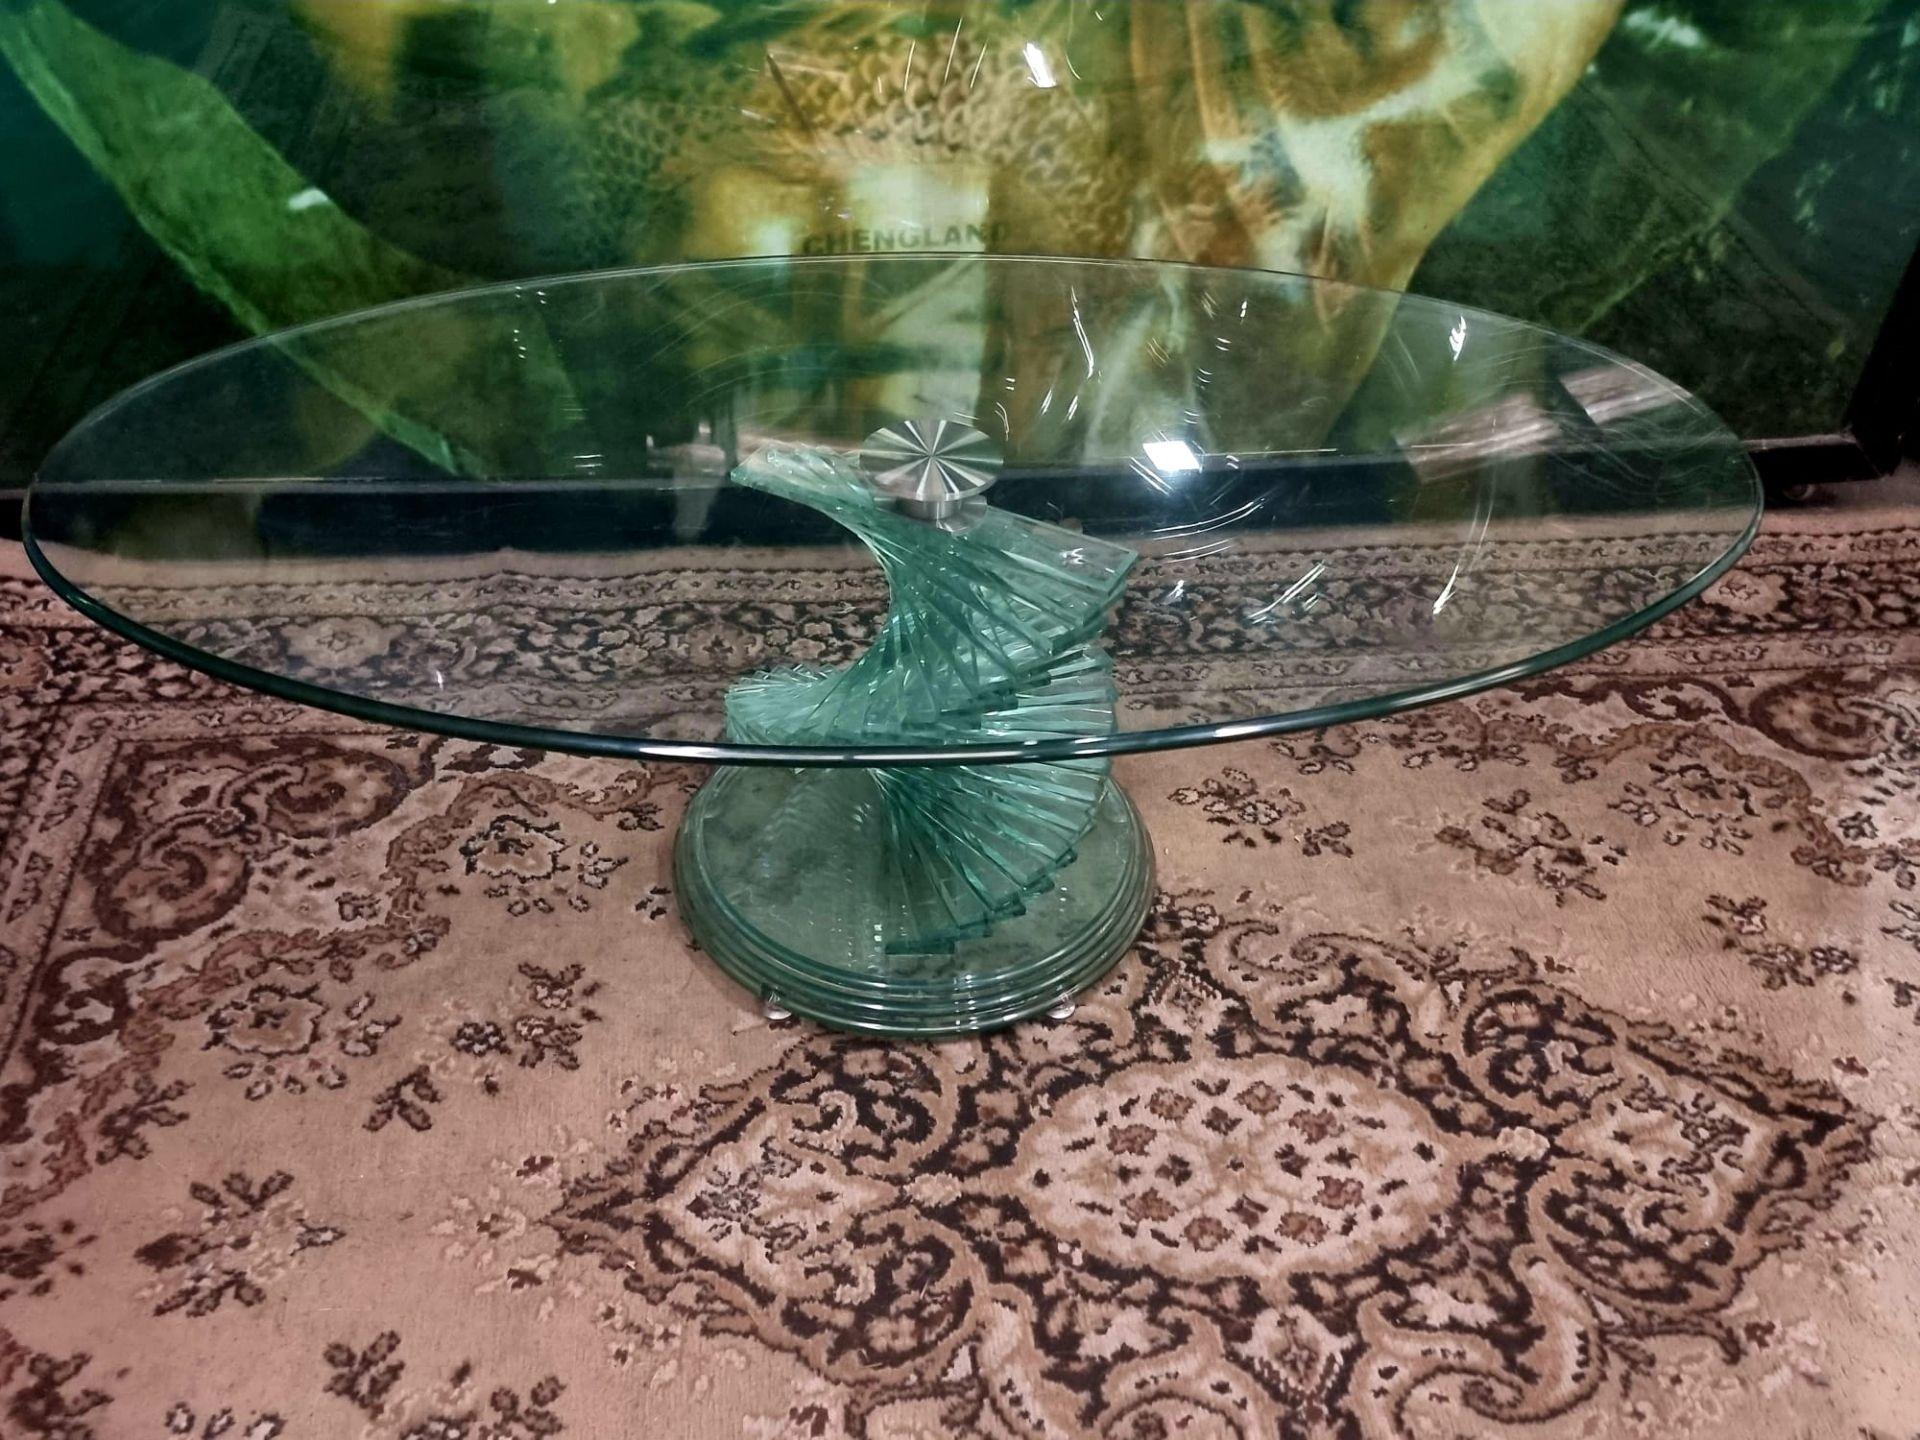 Ravello Spiral Glass Italian Design Ovoid Coffee Table A Mid Century Design Table With A Light Green - Image 2 of 8